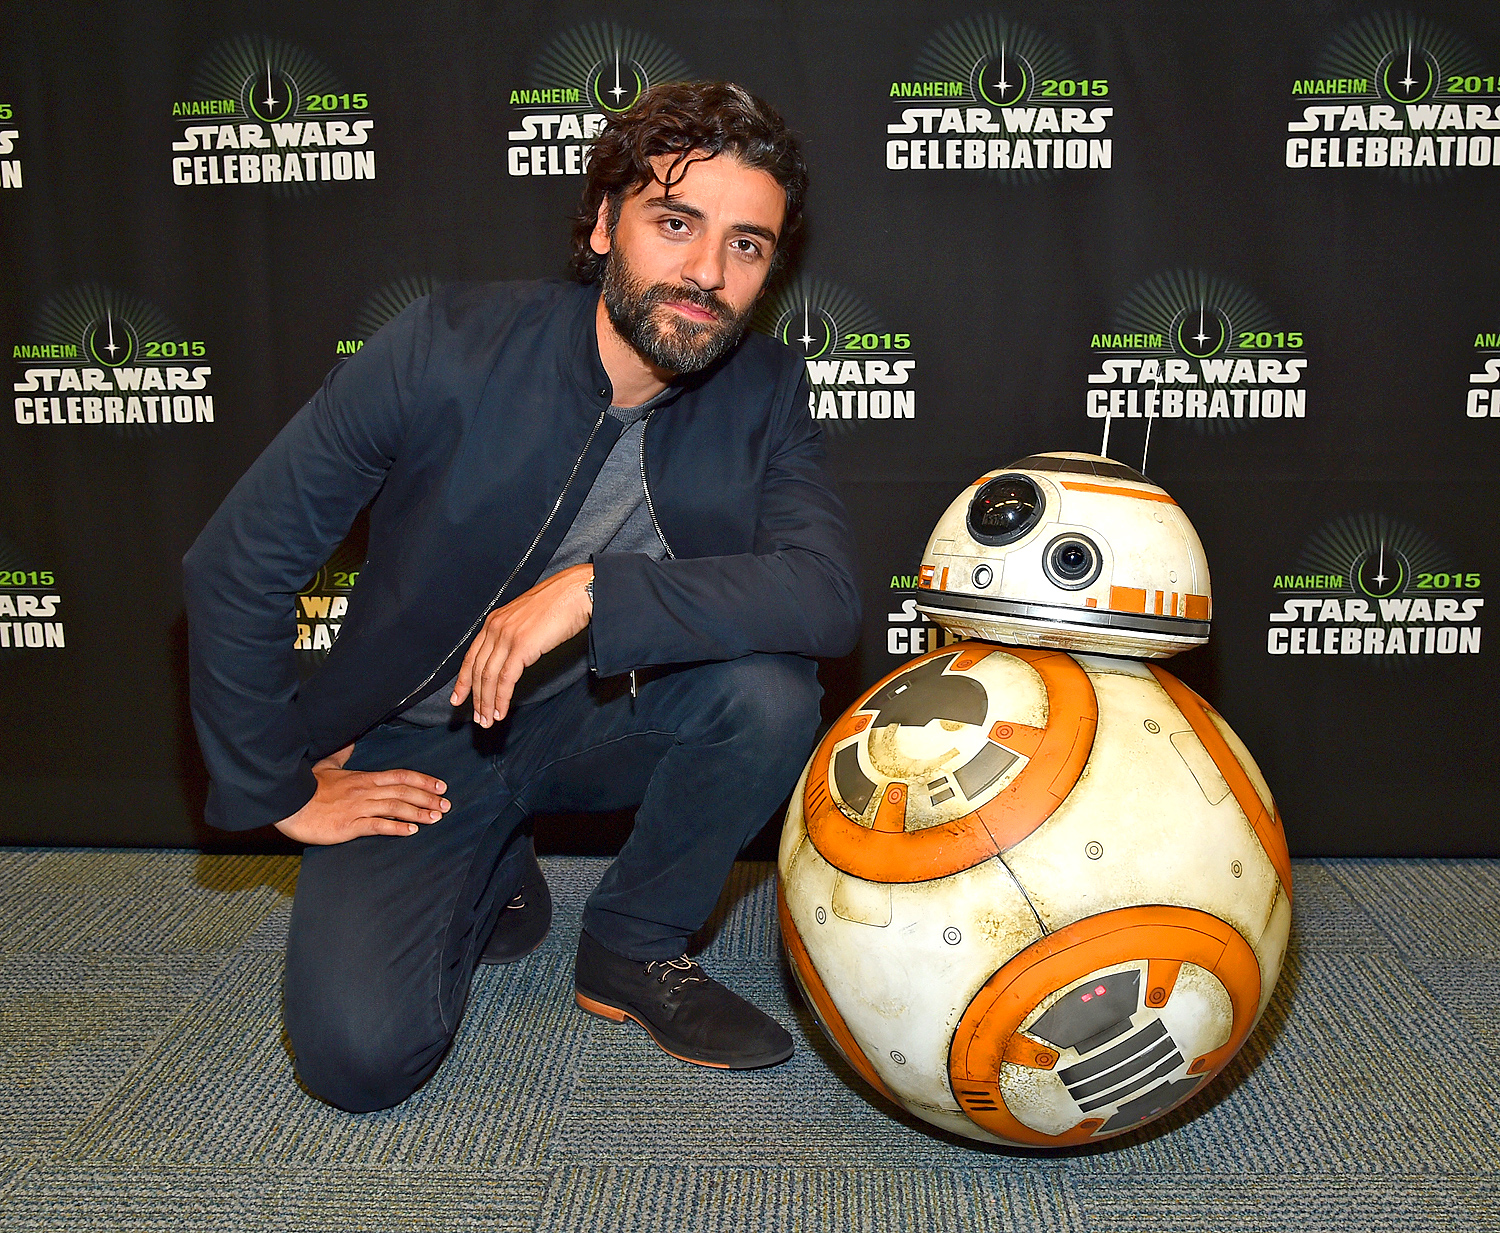 Who is the actor behind Poe Dameron in Star Wars: The Force Awakens?